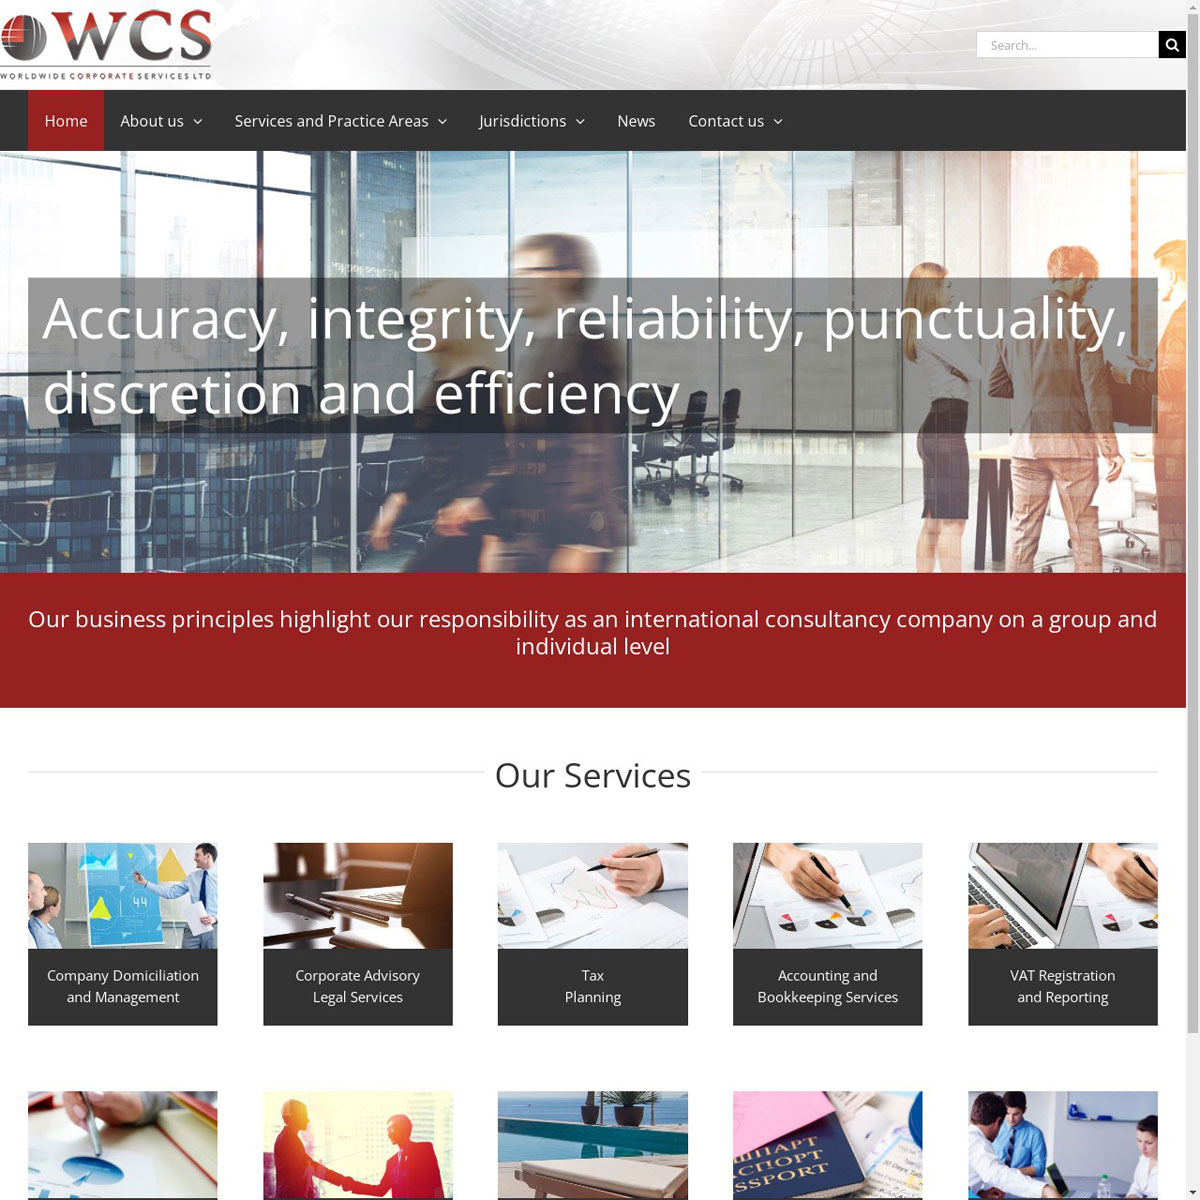 WCS Worldwide Corporate Services